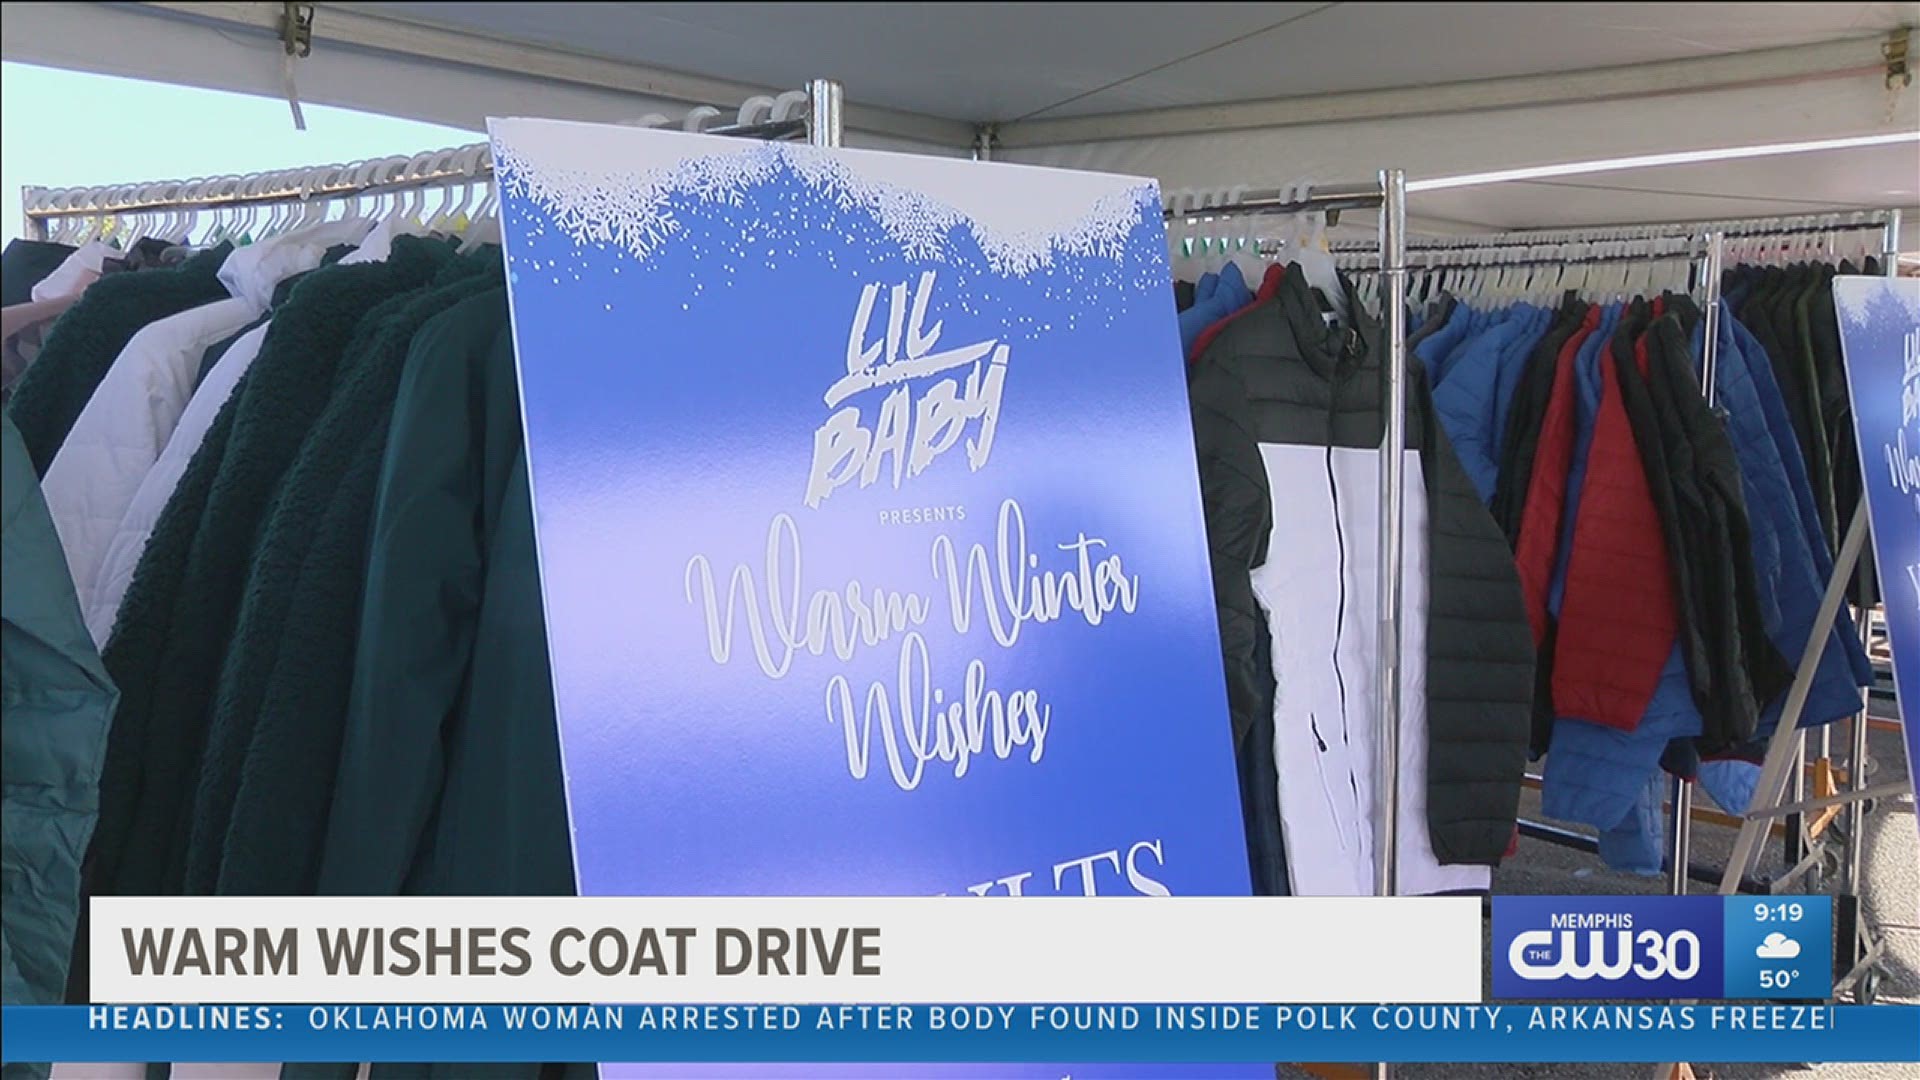 Memphis City Councilman J.B. Smiley and music rapper, Atlanta native Lil Baby partner together to give out coats for people to keep warm this winter